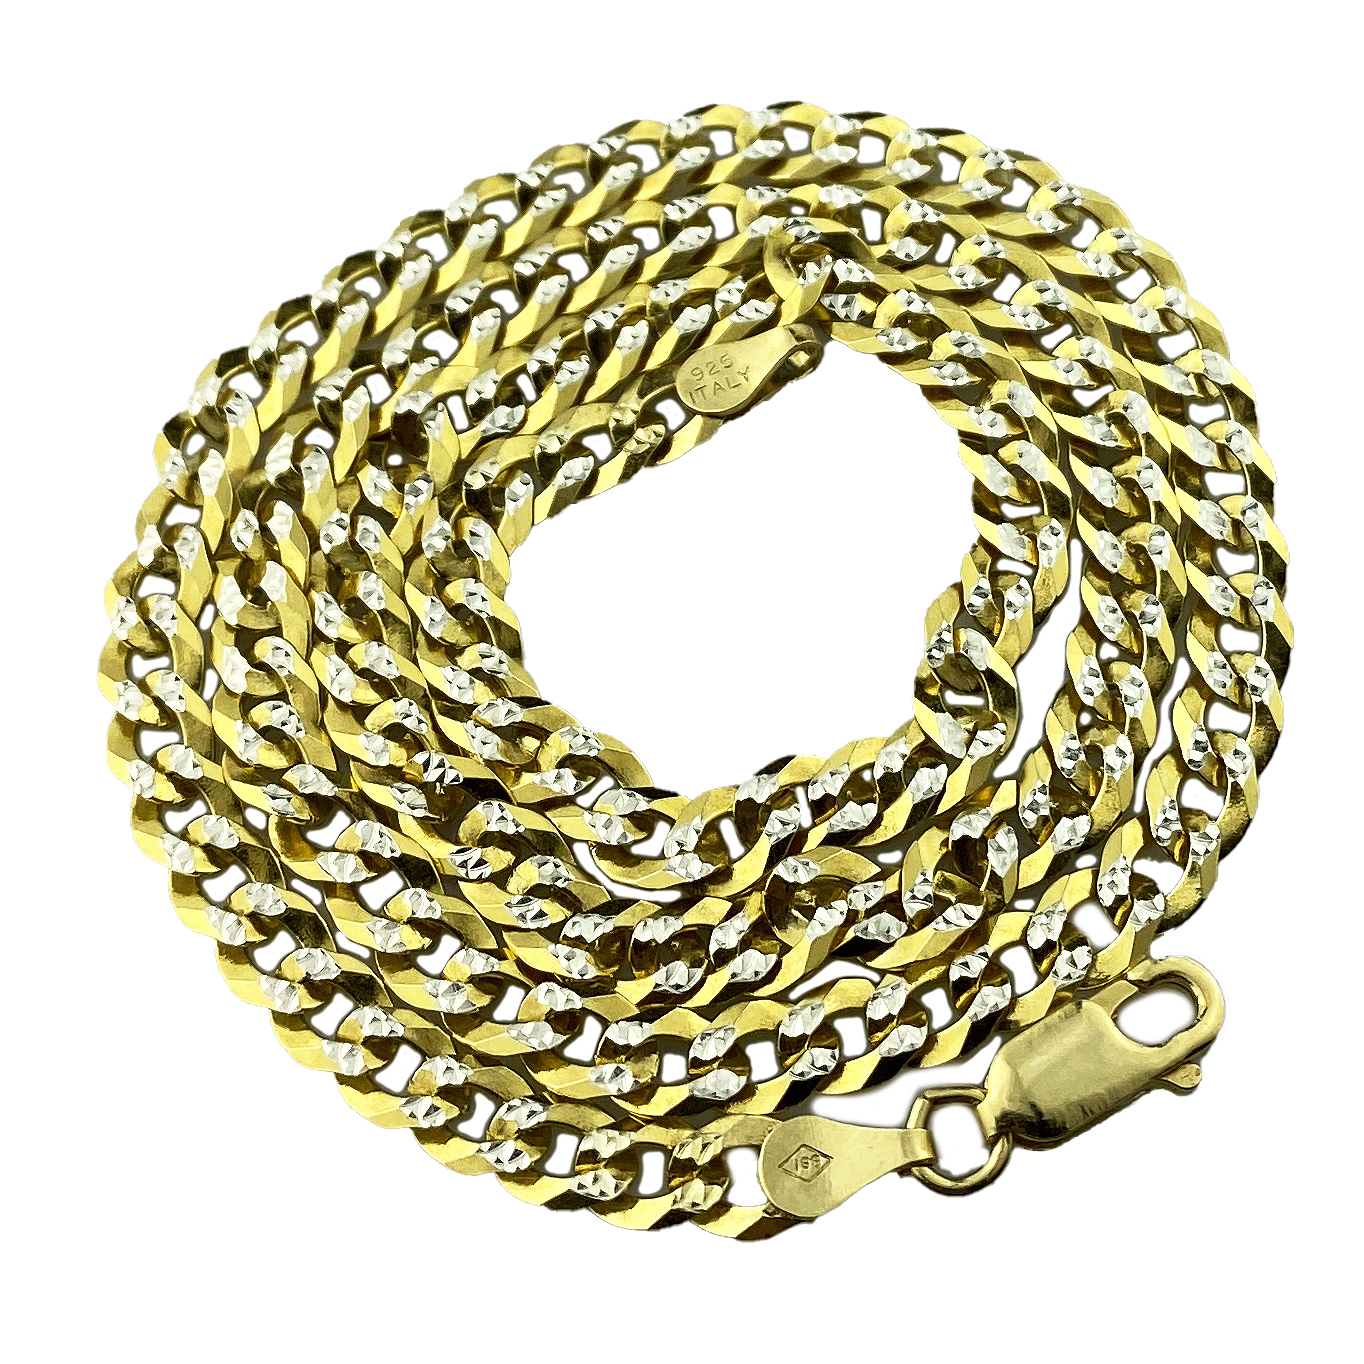 14K Gold Plated Over 925 Sterling Silver Two-Tone Diamond Cut Cuban Curb Chain 5MM Thick 18" Inch Choker Italy Necklace - image 1 of 13